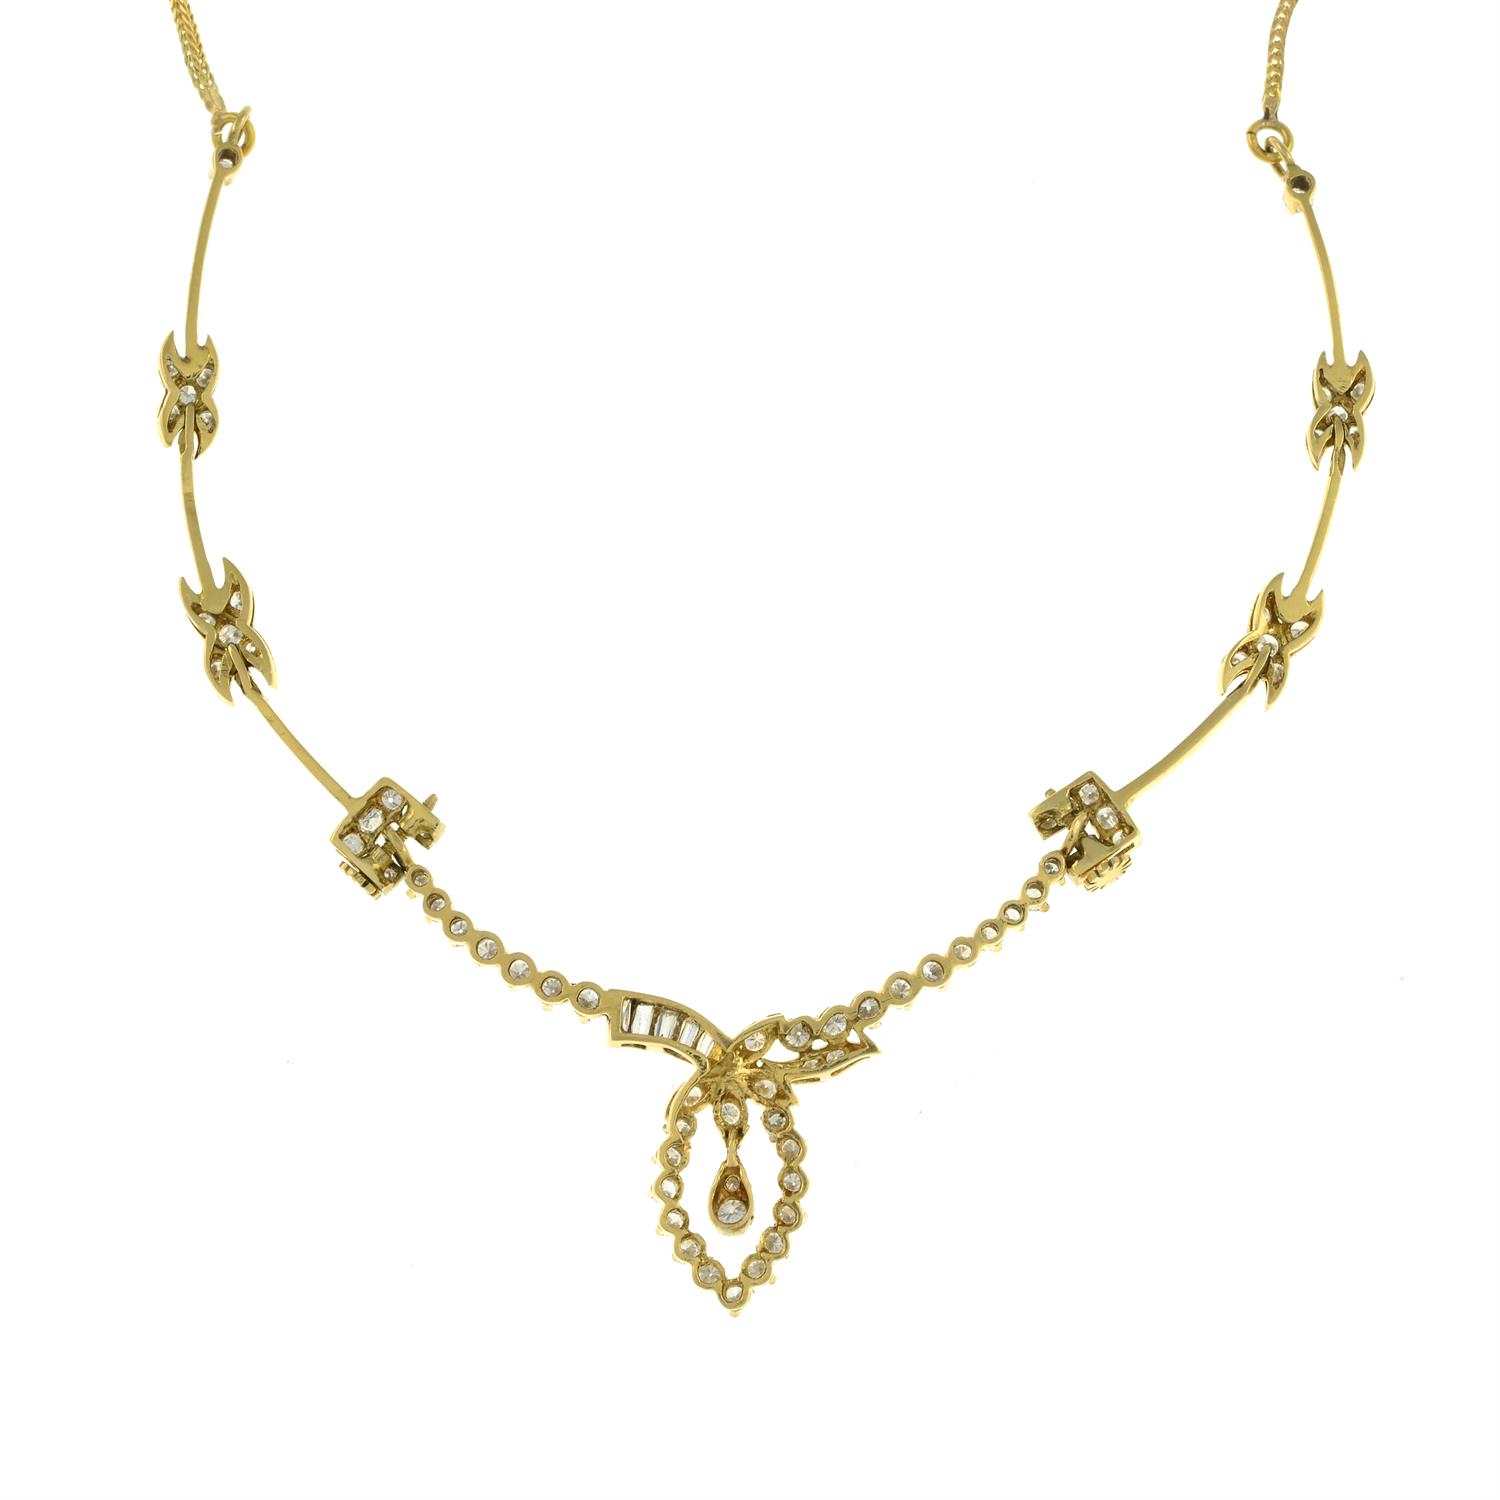 18ct gold diamond necklace - Image 3 of 3